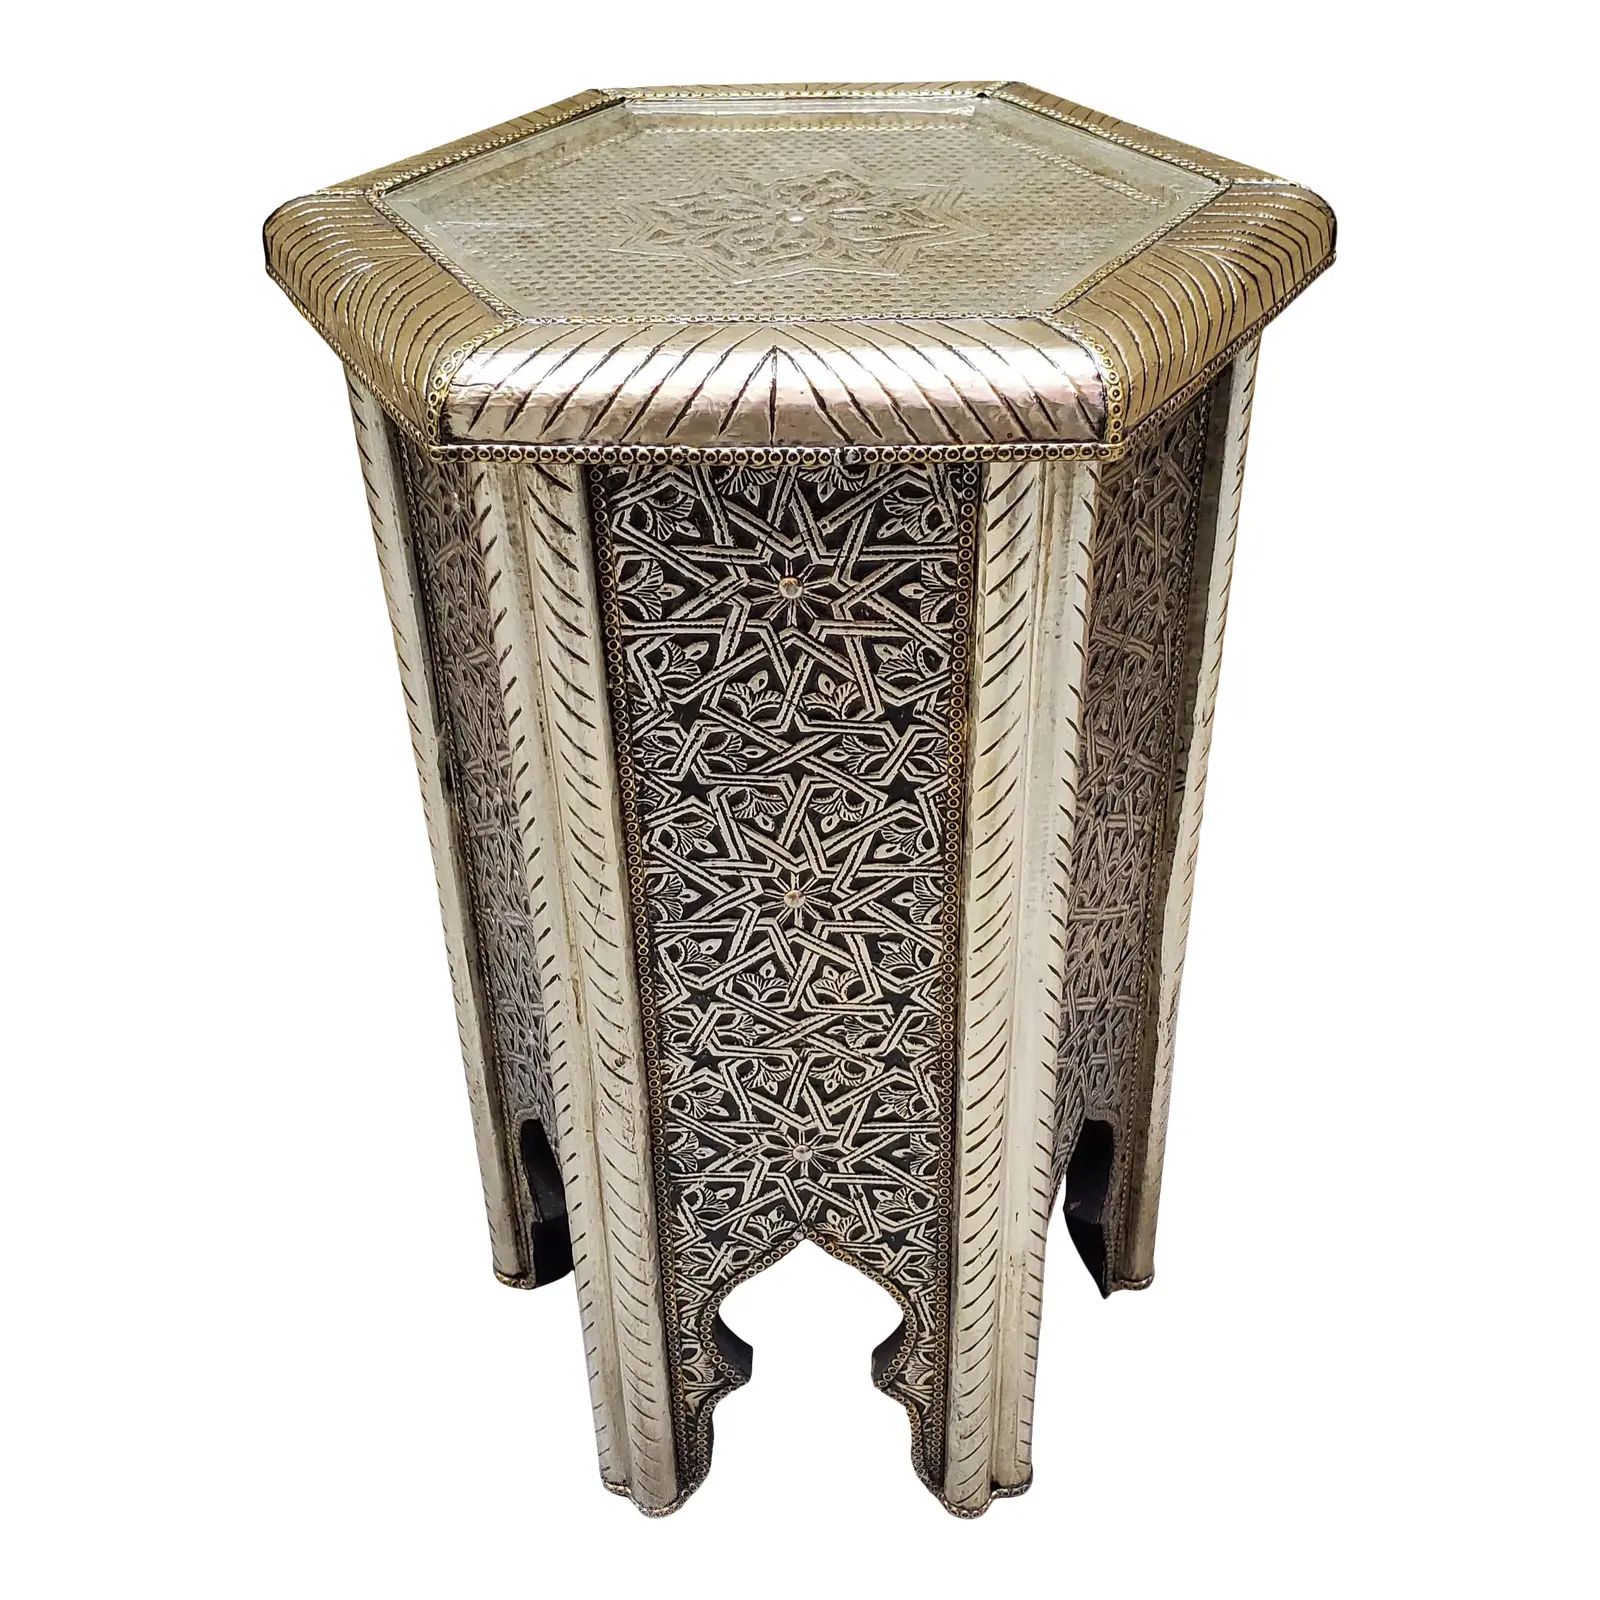 Moroccan Hexagonal Metal Inlaid Side Table with Silver Finish | Chairish